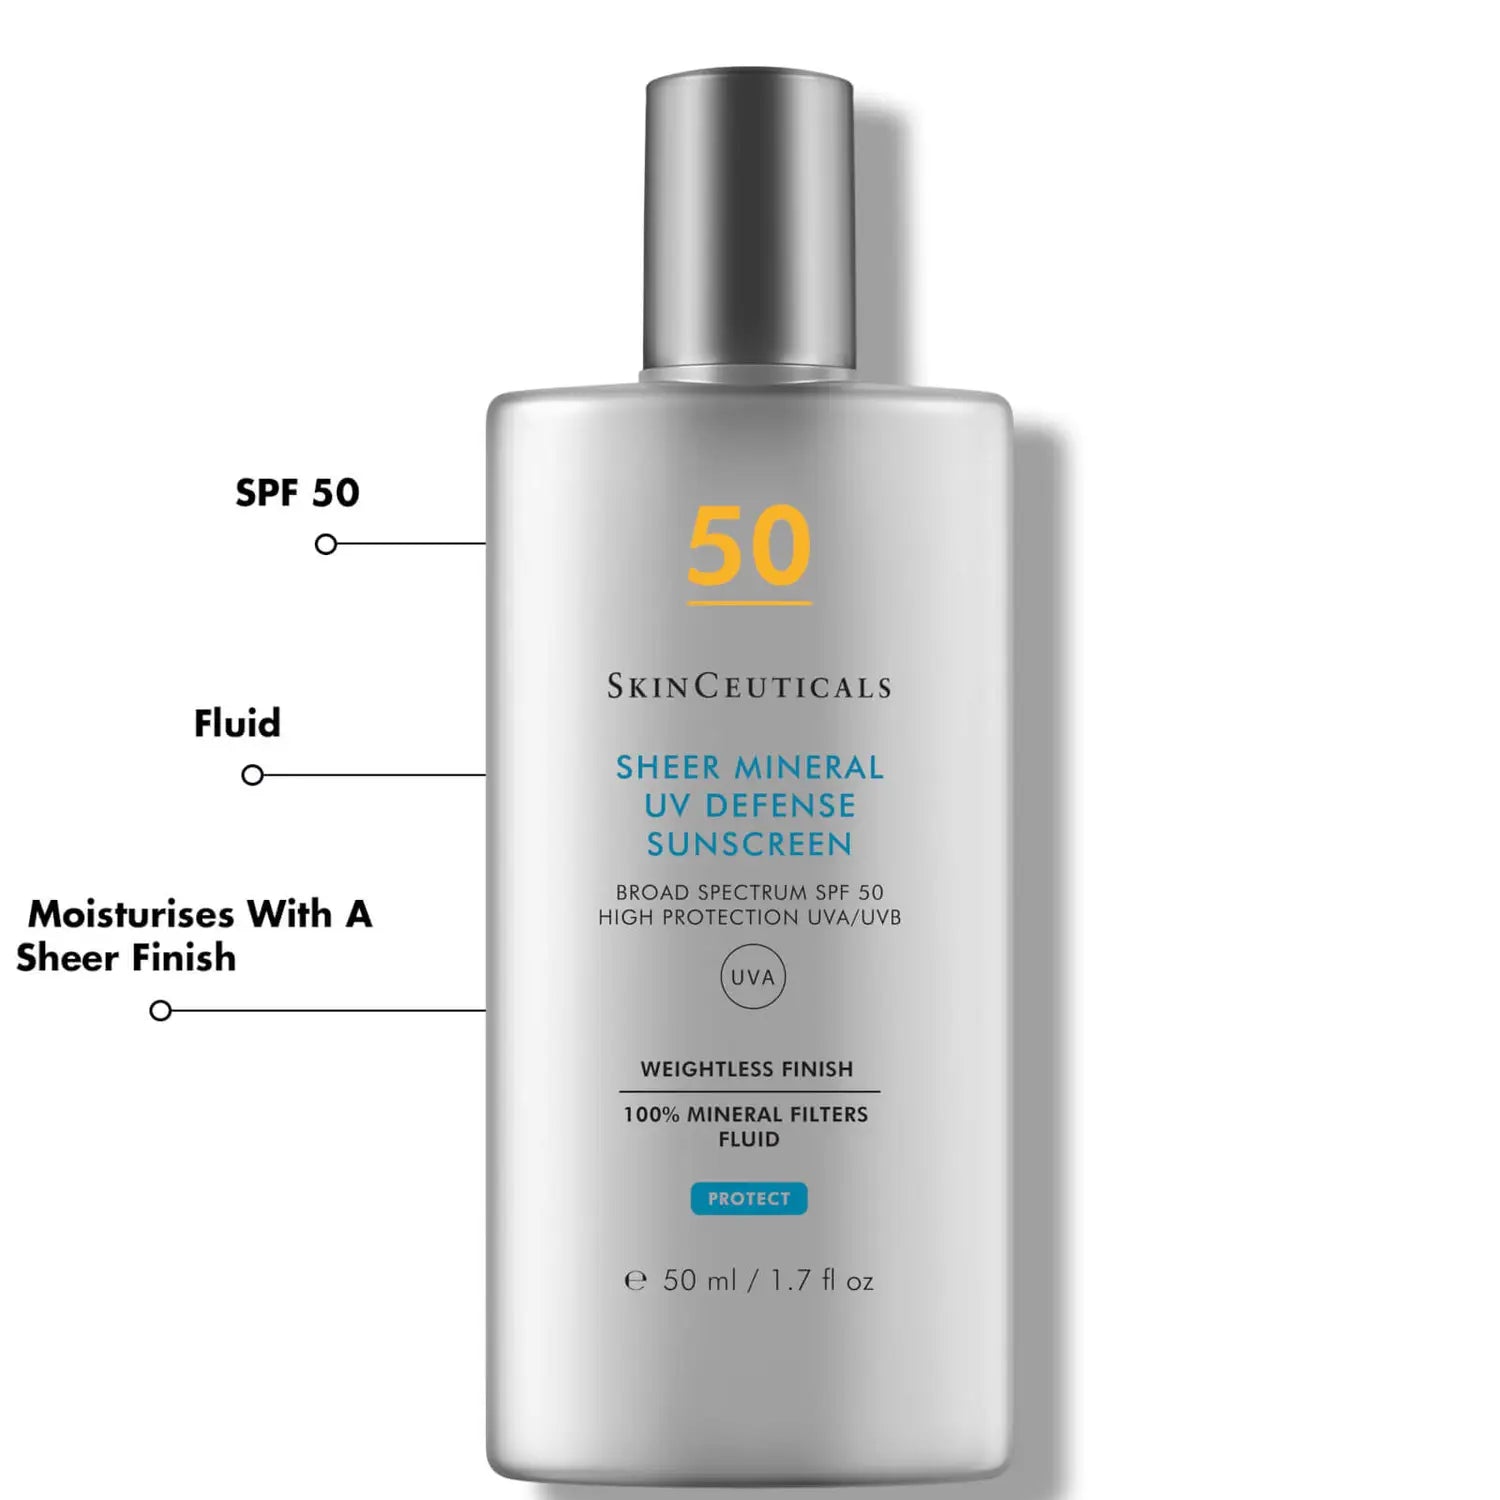 SkinCeuticals | Sheer Mineral UV Defense SPF50 Sunscreen Protection (50ml)